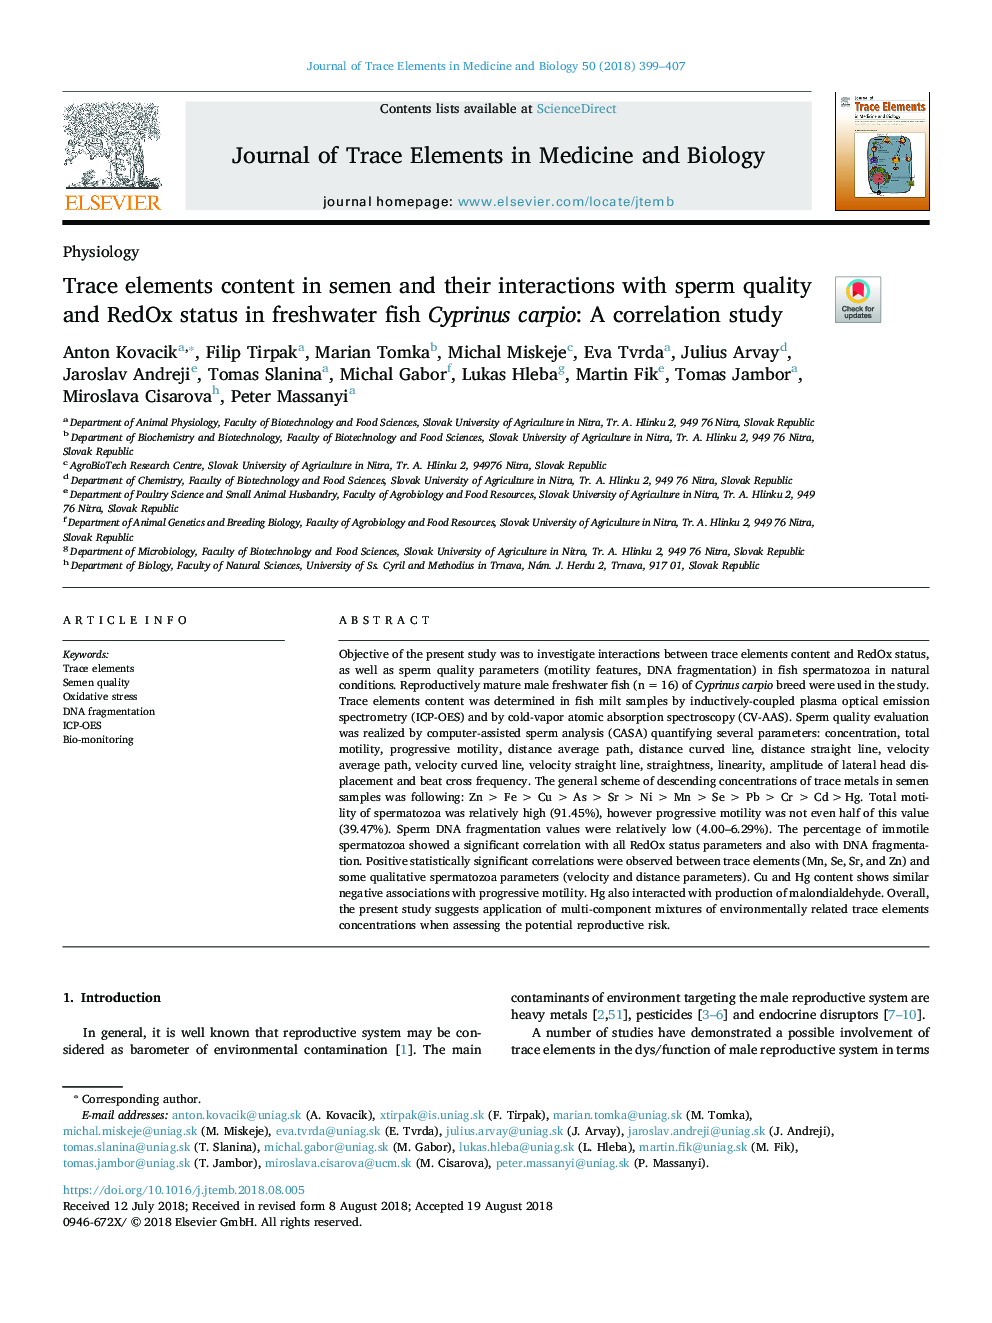 Trace elements content in semen and their interactions with sperm quality and RedOx status in freshwater fish Cyprinus carpio: A correlation study